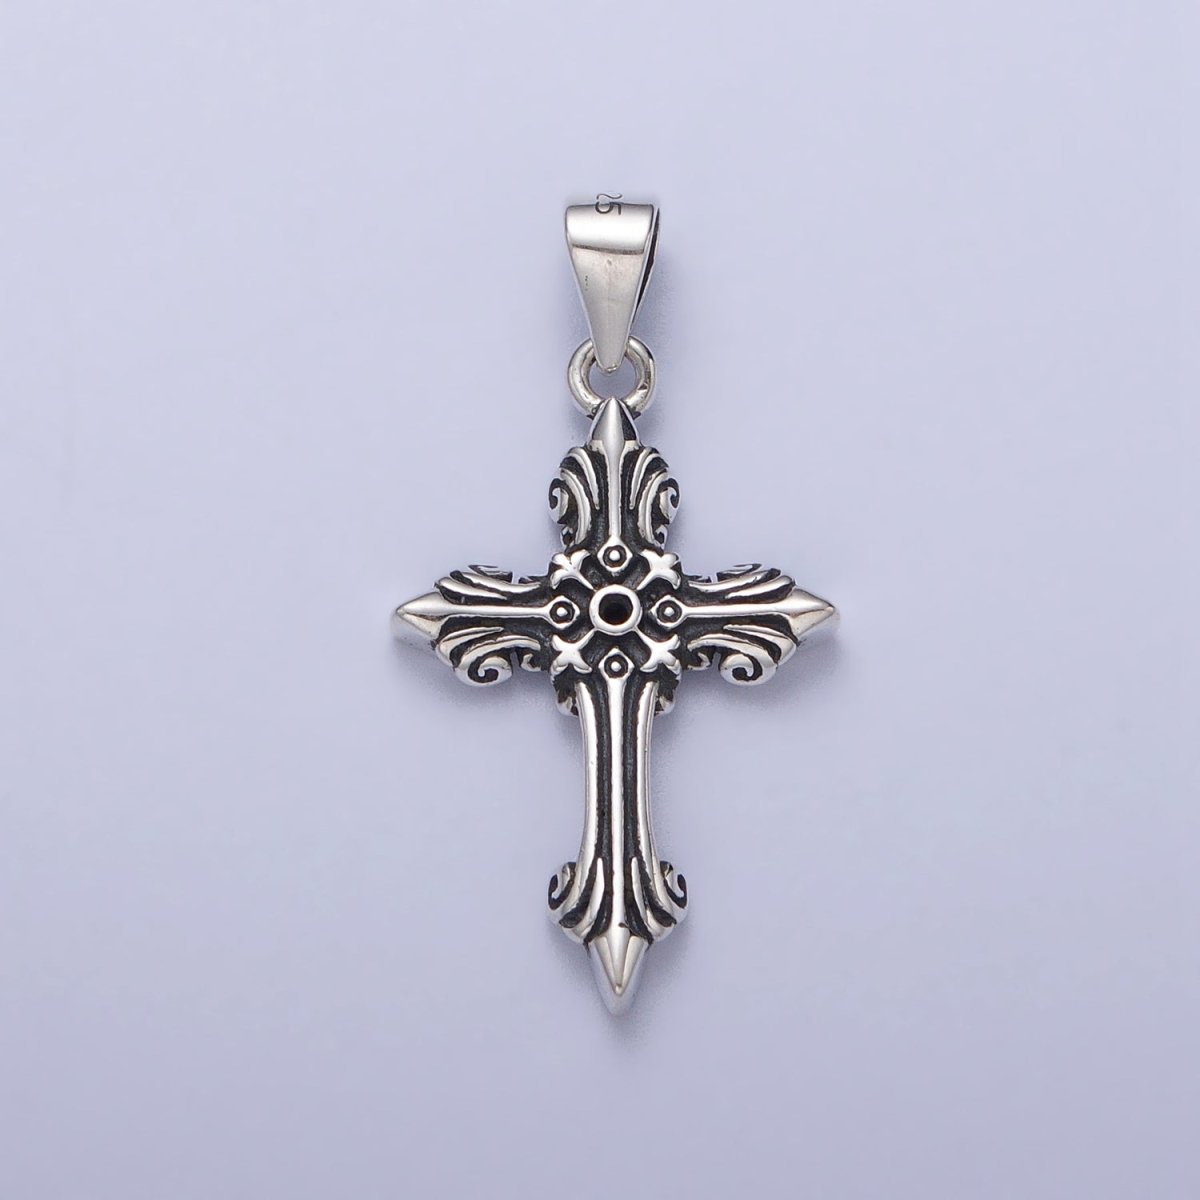 OS Sterling Silver Cross Pendant Men Antique Cross Charm for Religious Jewelry P-1082 - DLUXCA